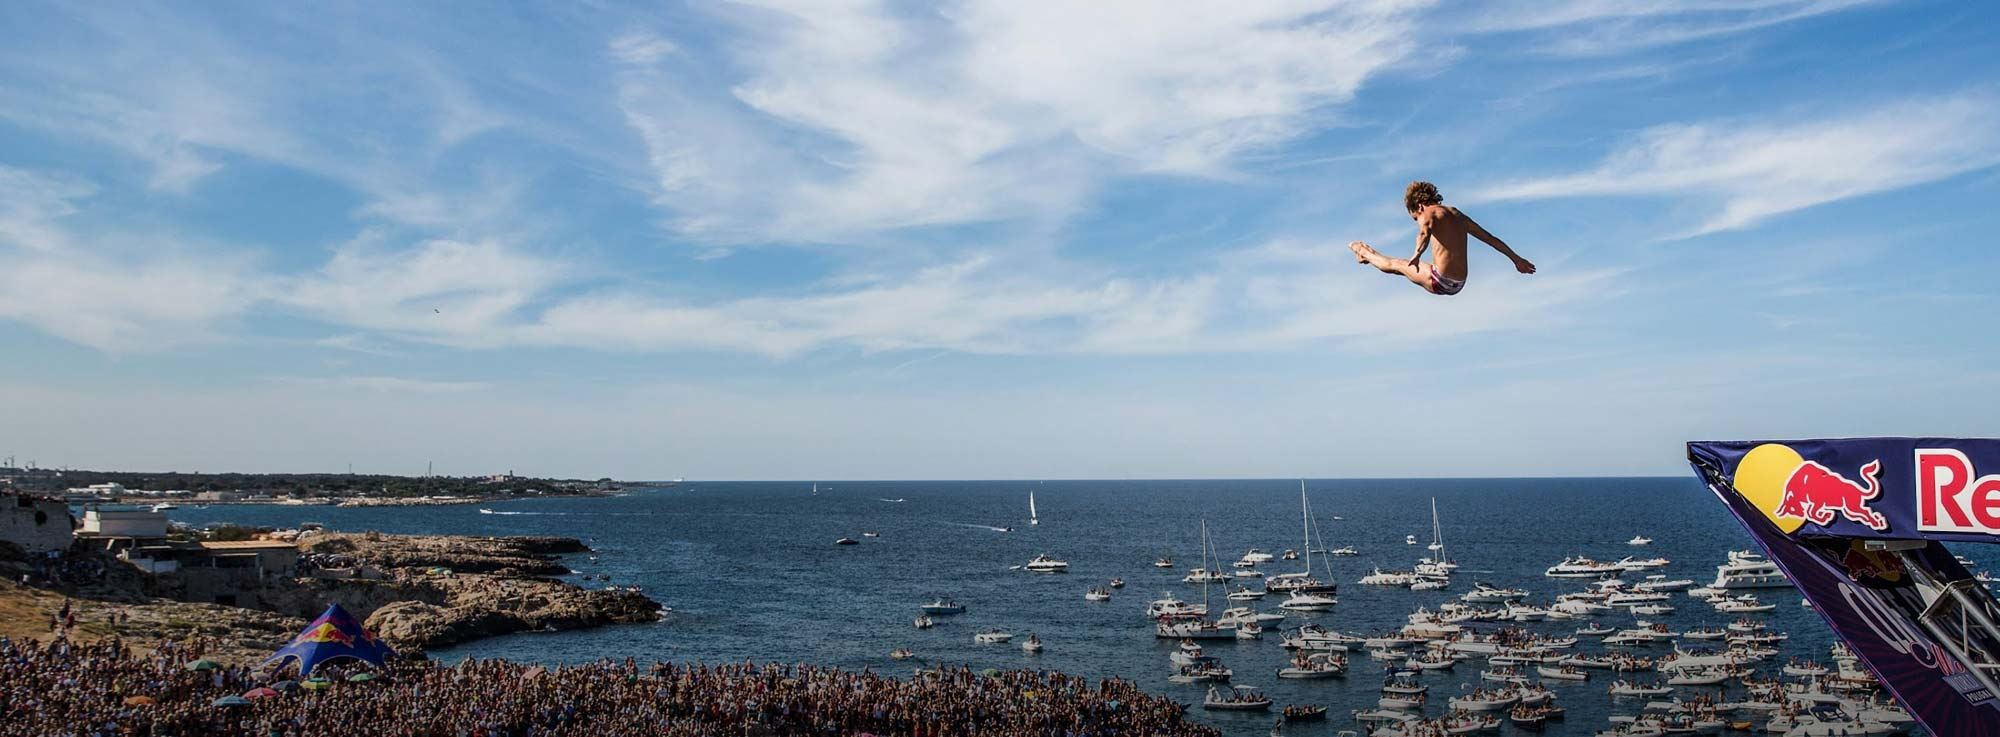 Polignano a Mare: Red Bull Cliff Diving World Series 2017 